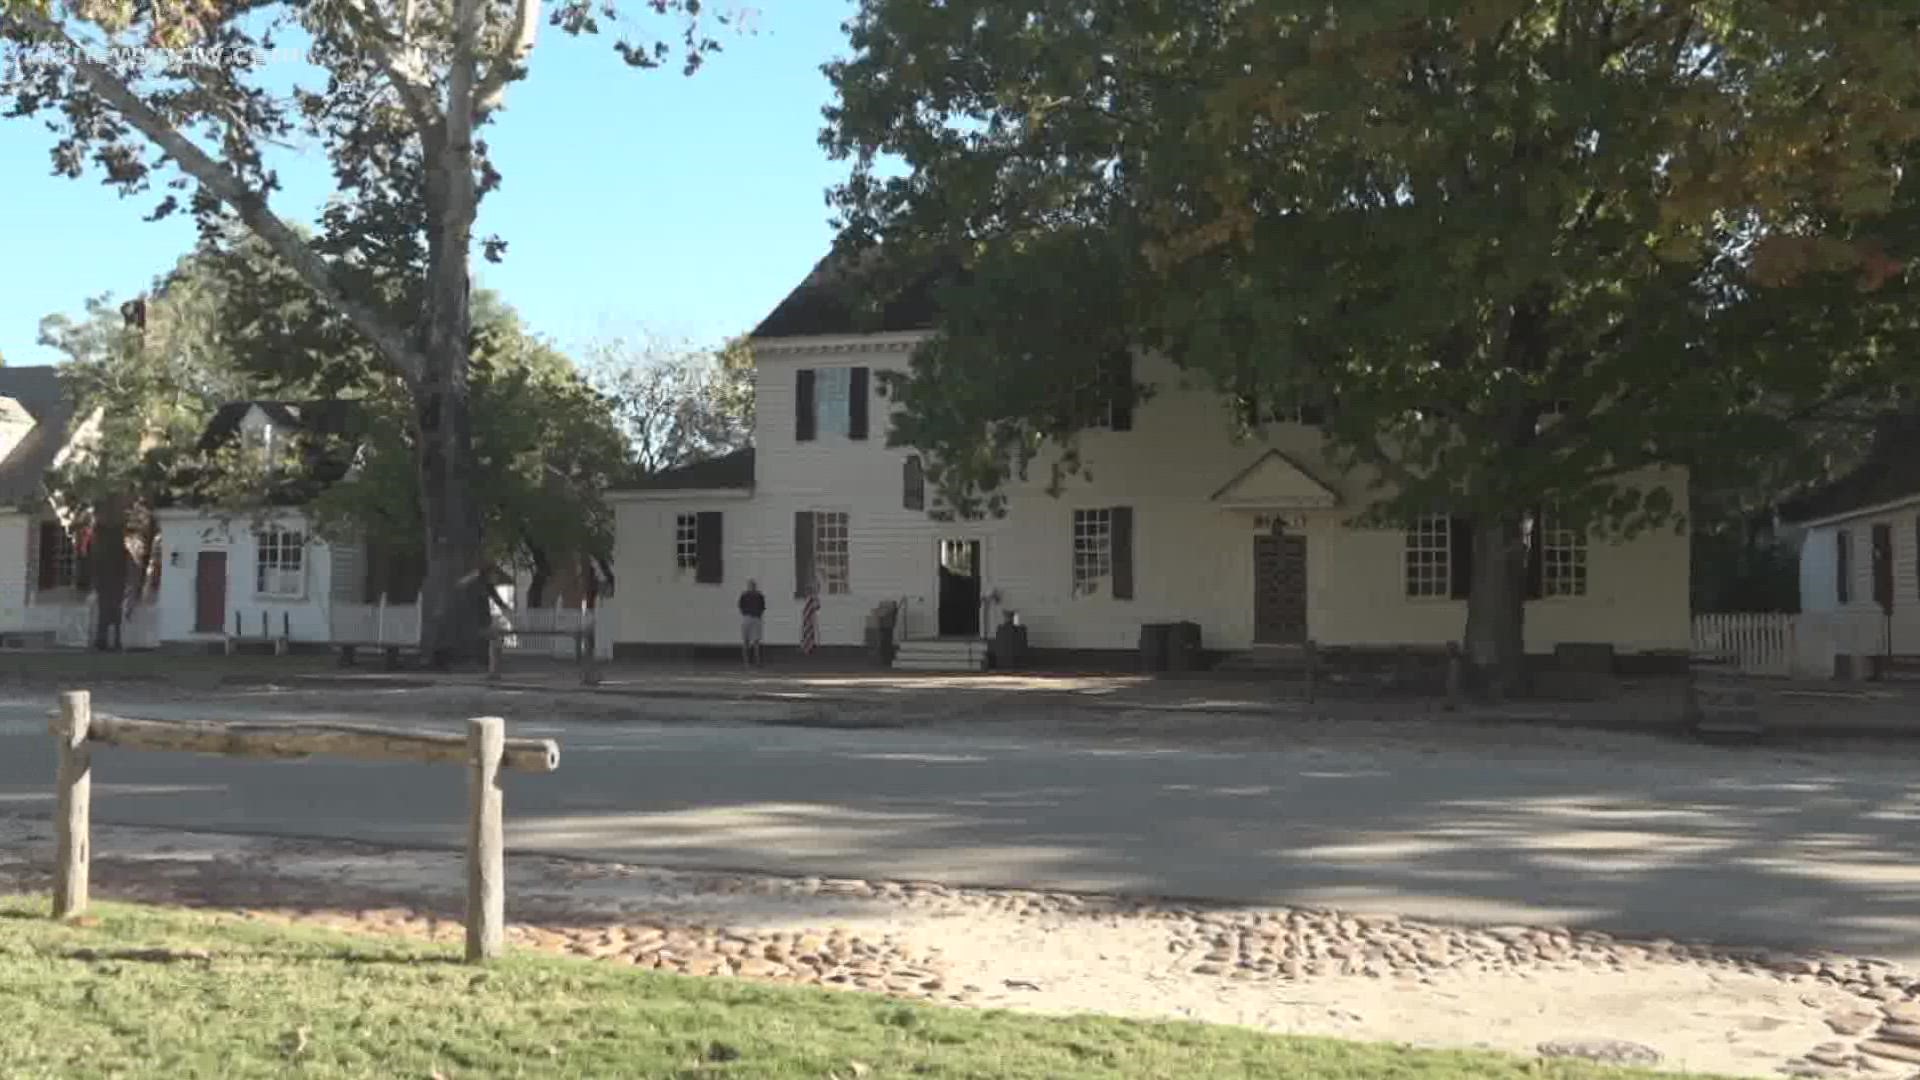 Colonial Williamsburg was one of America’s first planned cities, dating back to the 17th century. With that much history comes an awful lot of ghost stories.